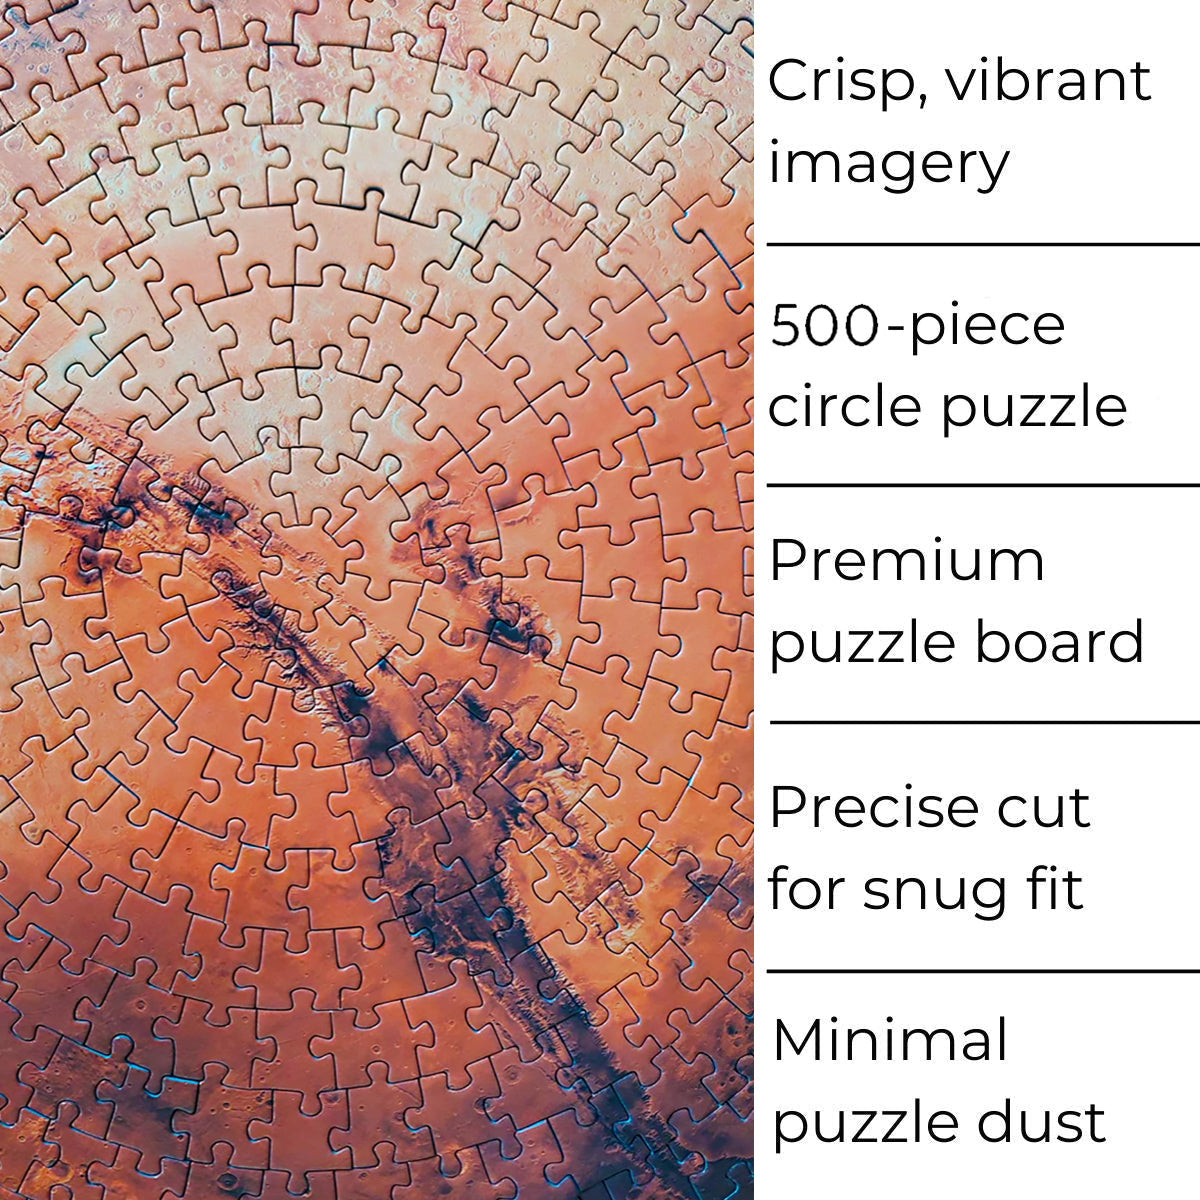 You'll find exactly 500 pieces in the Mars puzzle box, as well as a 2.1 poster included for reference.